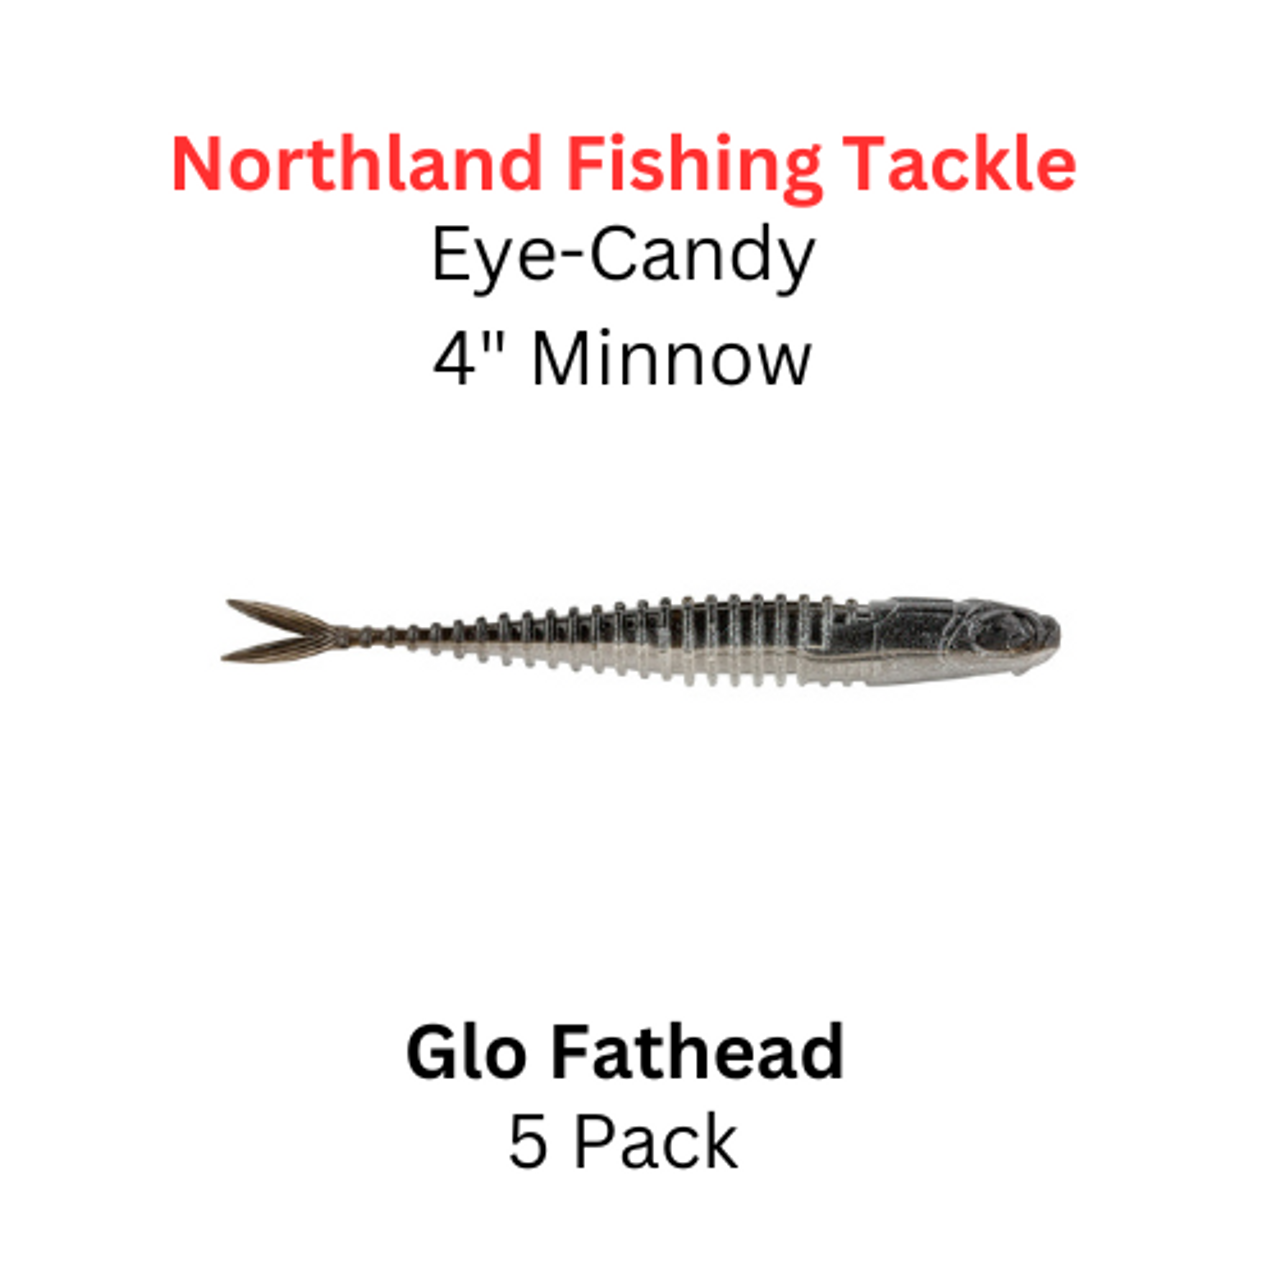 https://cdn11.bigcommerce.com/s-u9nbd/images/stencil/1280x1280/products/6704/16944/Northland_Fishing_Tackle_Eye_Candy_4_Minnow_Glo_Fathead__04950.1688773999.png?c=2